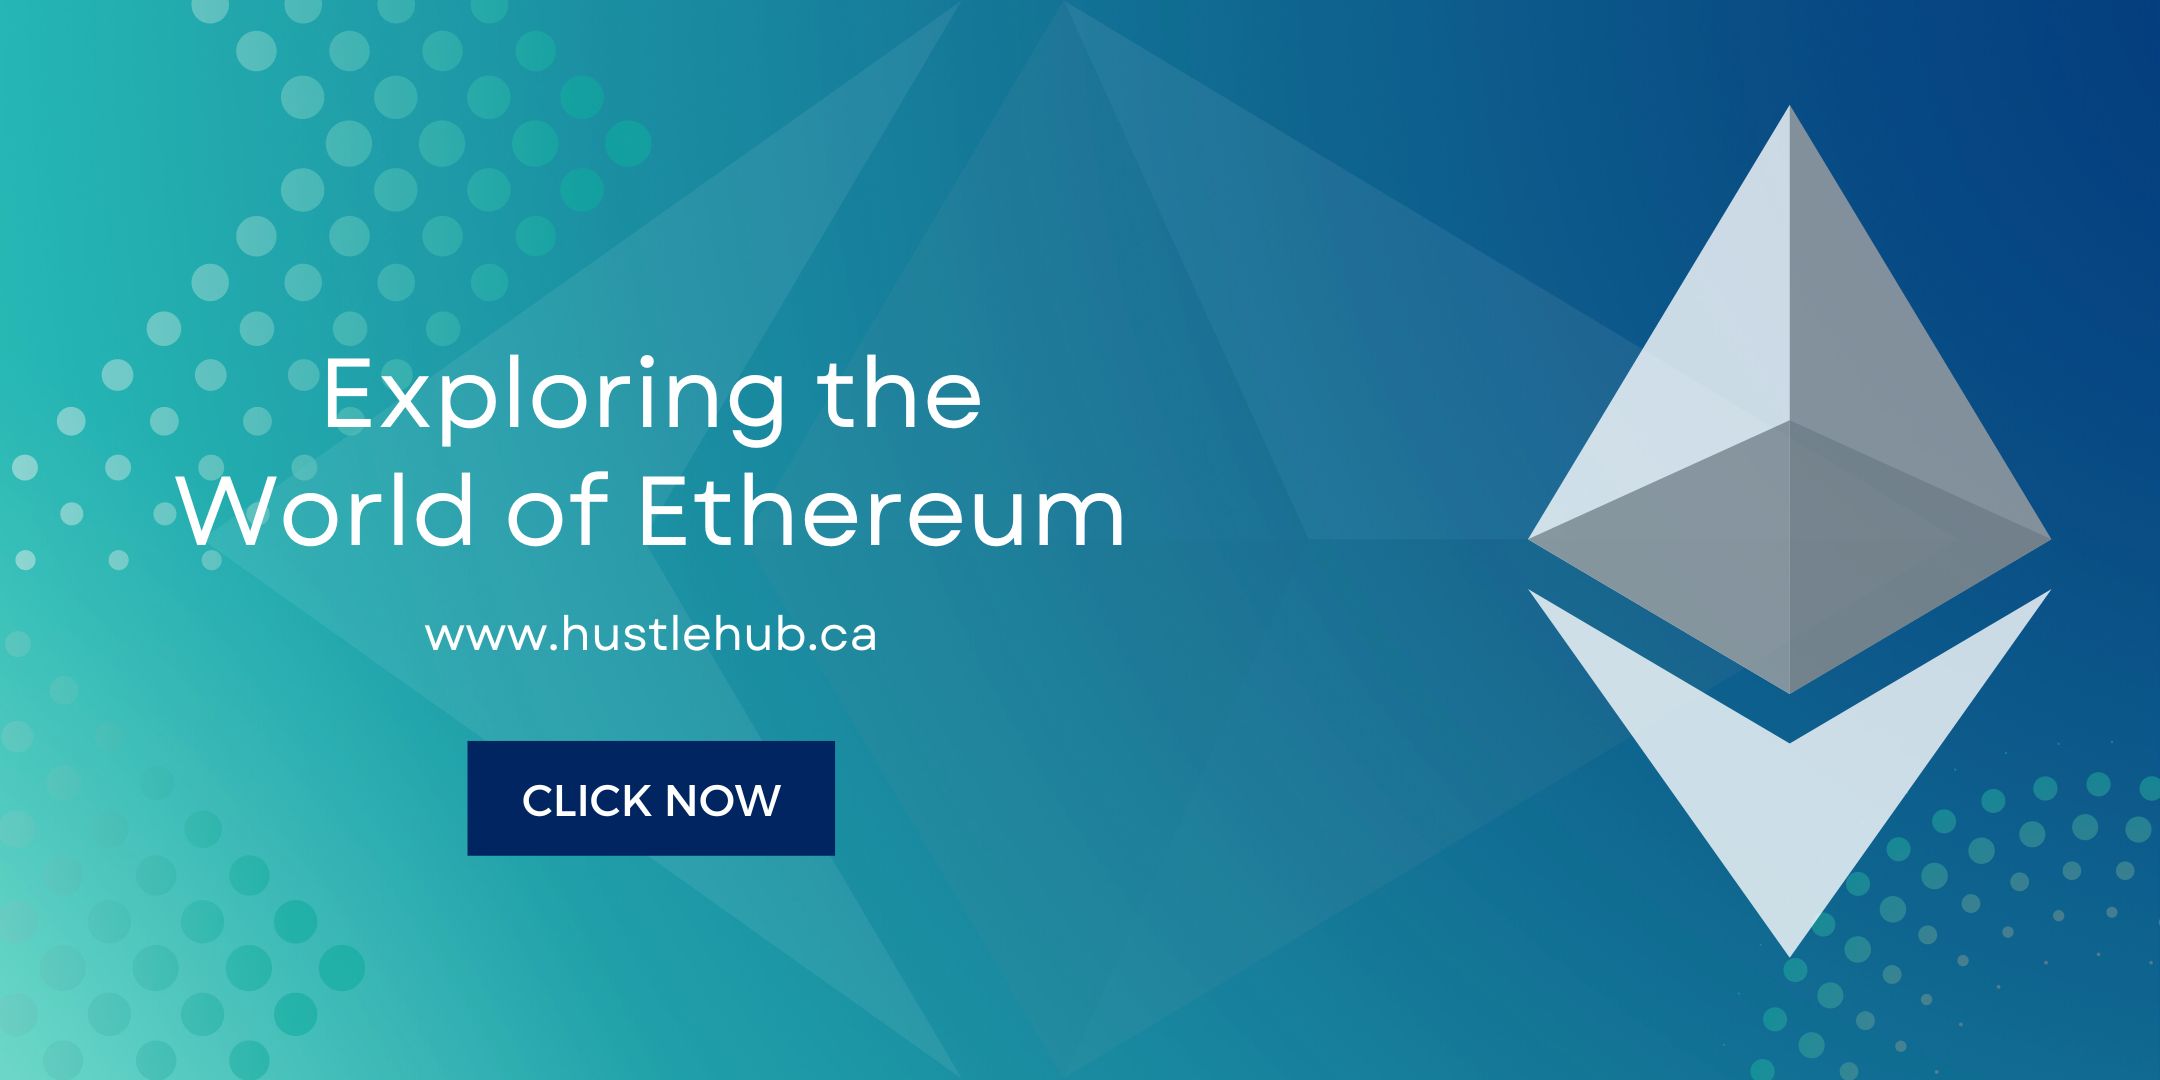 what is ethereum trading at